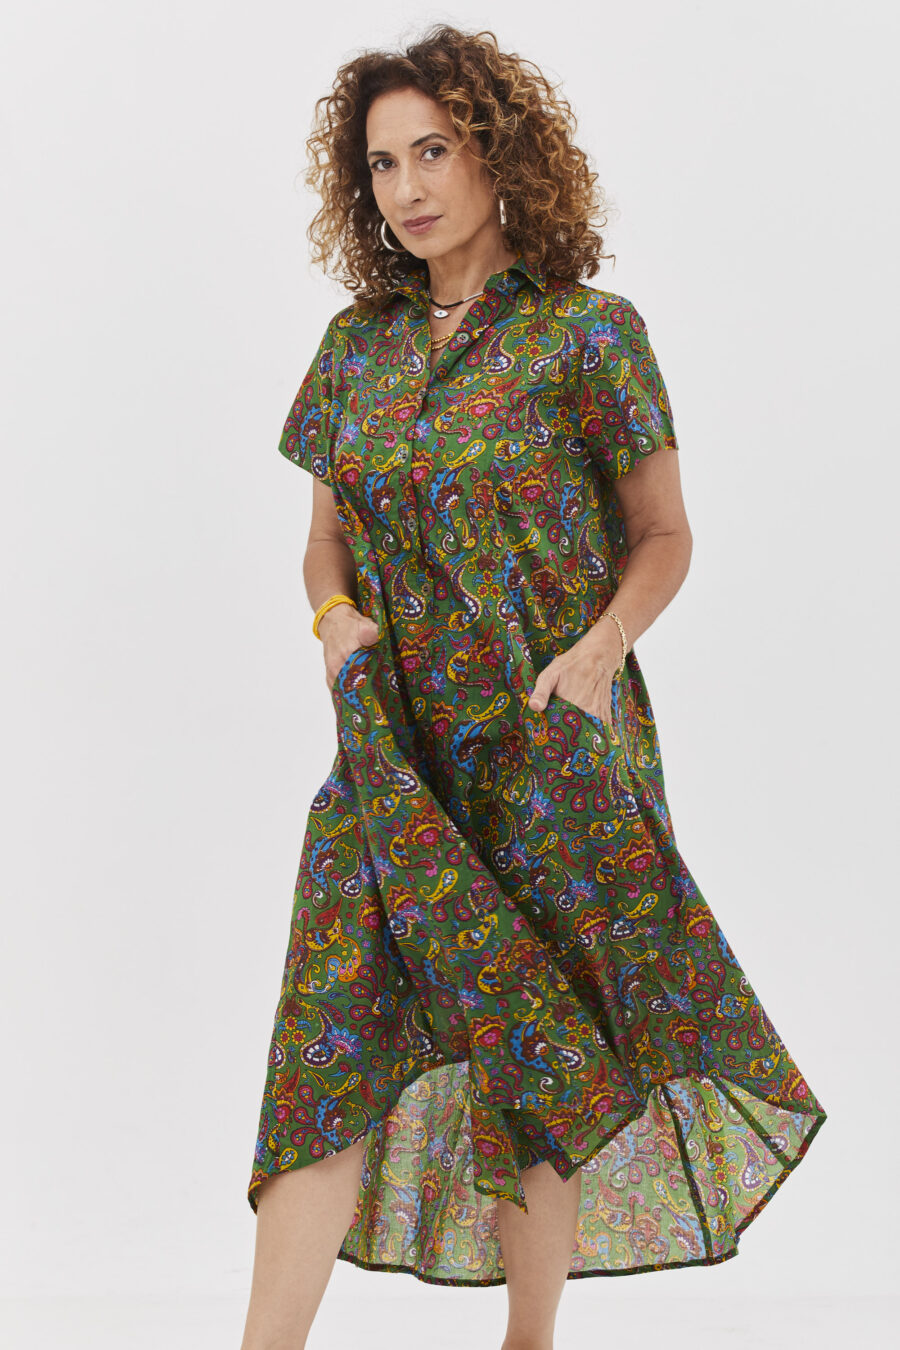 Aiya’le dress | Uniquely designed oversize dress – Green paisley print, green dress with colorful paisley print.